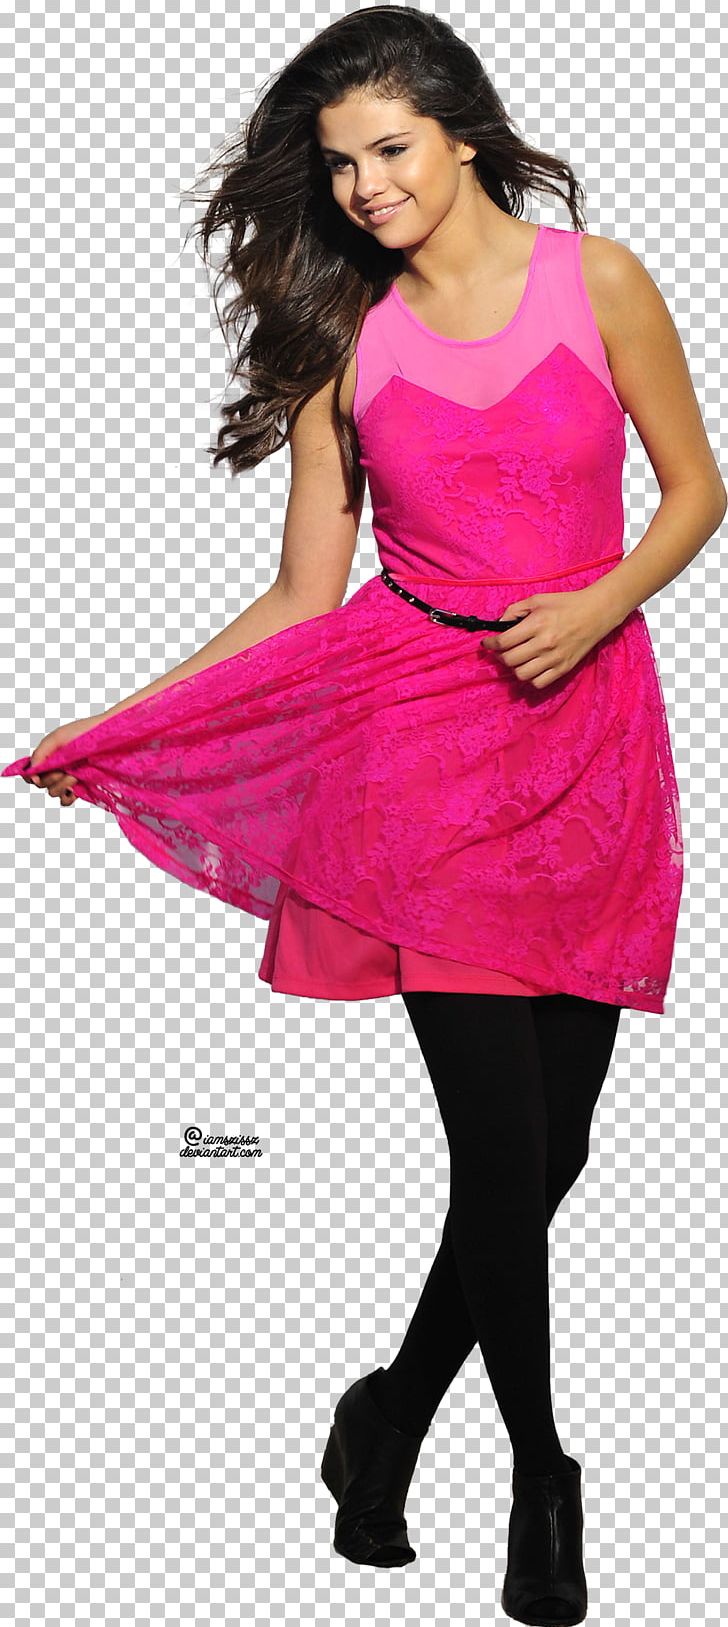 Dream Out Loud By Selena Gomez Photo Shoot Barney & Friends PNG, Clipart, Abdomen, Actor, Barney Friends, Celebrity, Cocktail Dress Free PNG Download